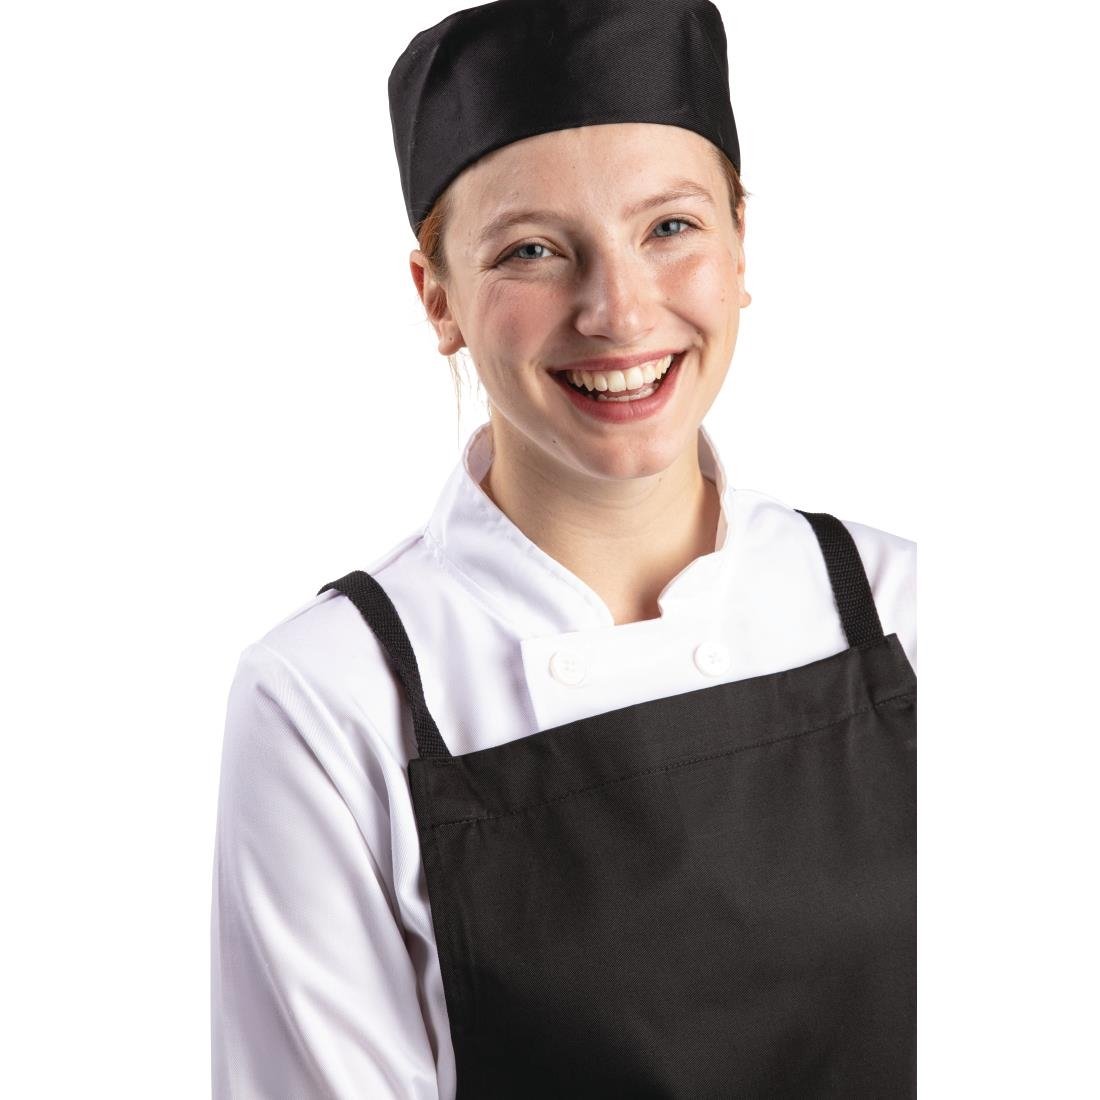 A206-S Whites Chef Skull Cap Polycotton Black - S JD Catering Equipment Solutions Ltd